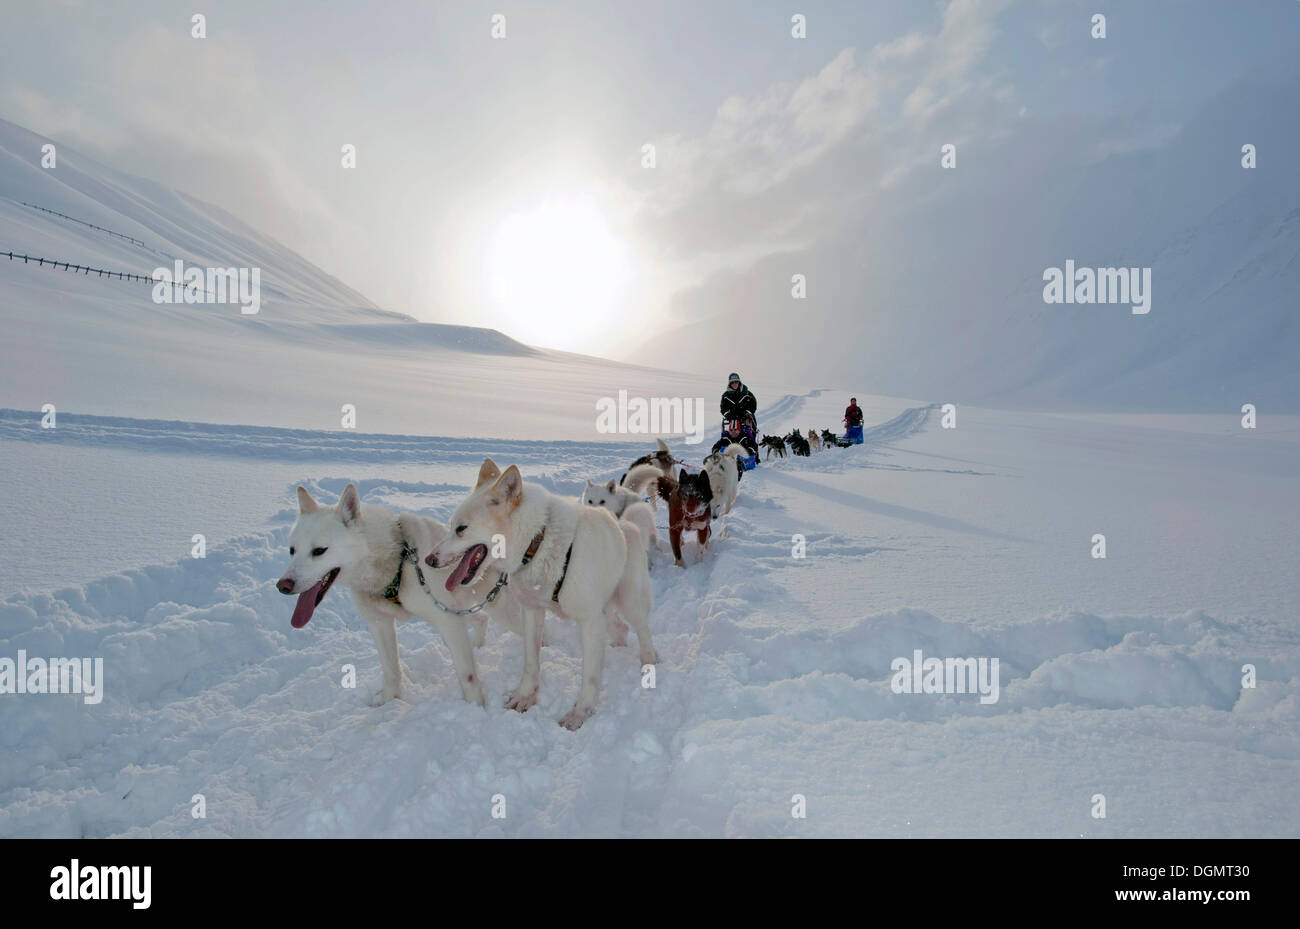 Dog sled team with Alaskan Huskies and passengers with snow flurries against a low winter sun, Spitsbergen, Svalbard, Norway Stock Photo